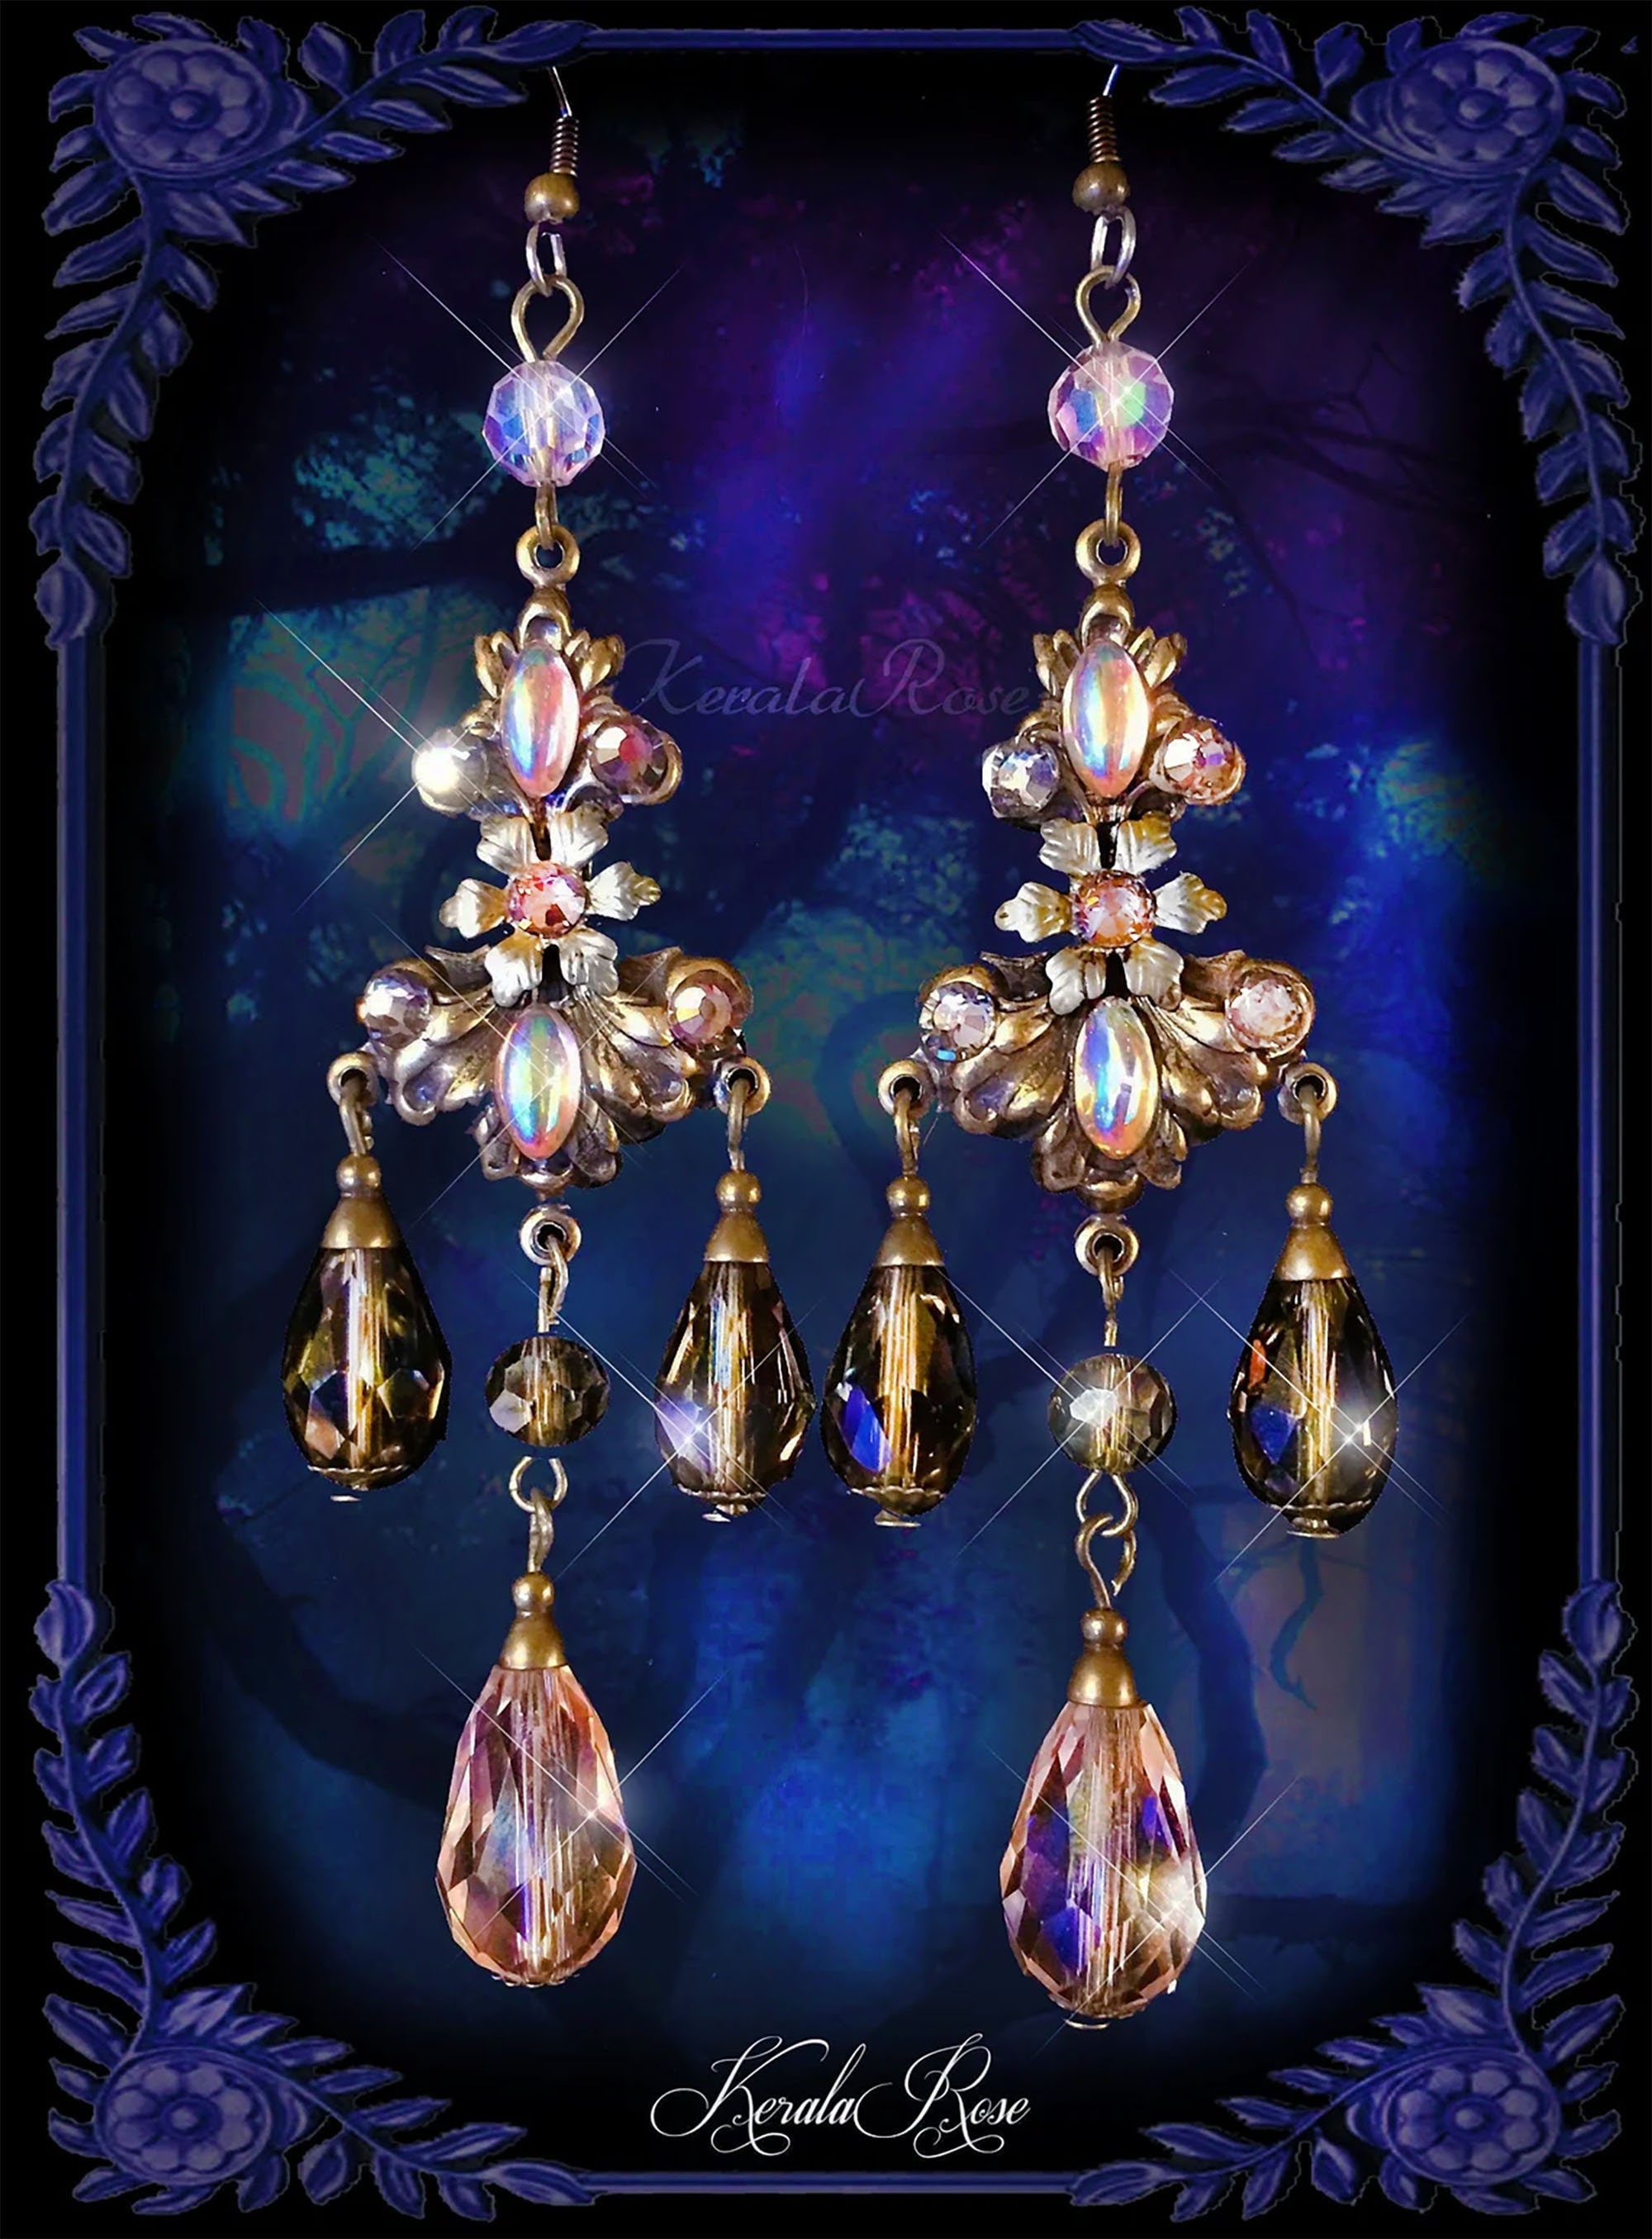 Neo- Victorian Crystal Filigree Gypsy Chandelier Earrings Antique Brass Exotic Bohemian Green White Color Options! Purple Pearl Blue